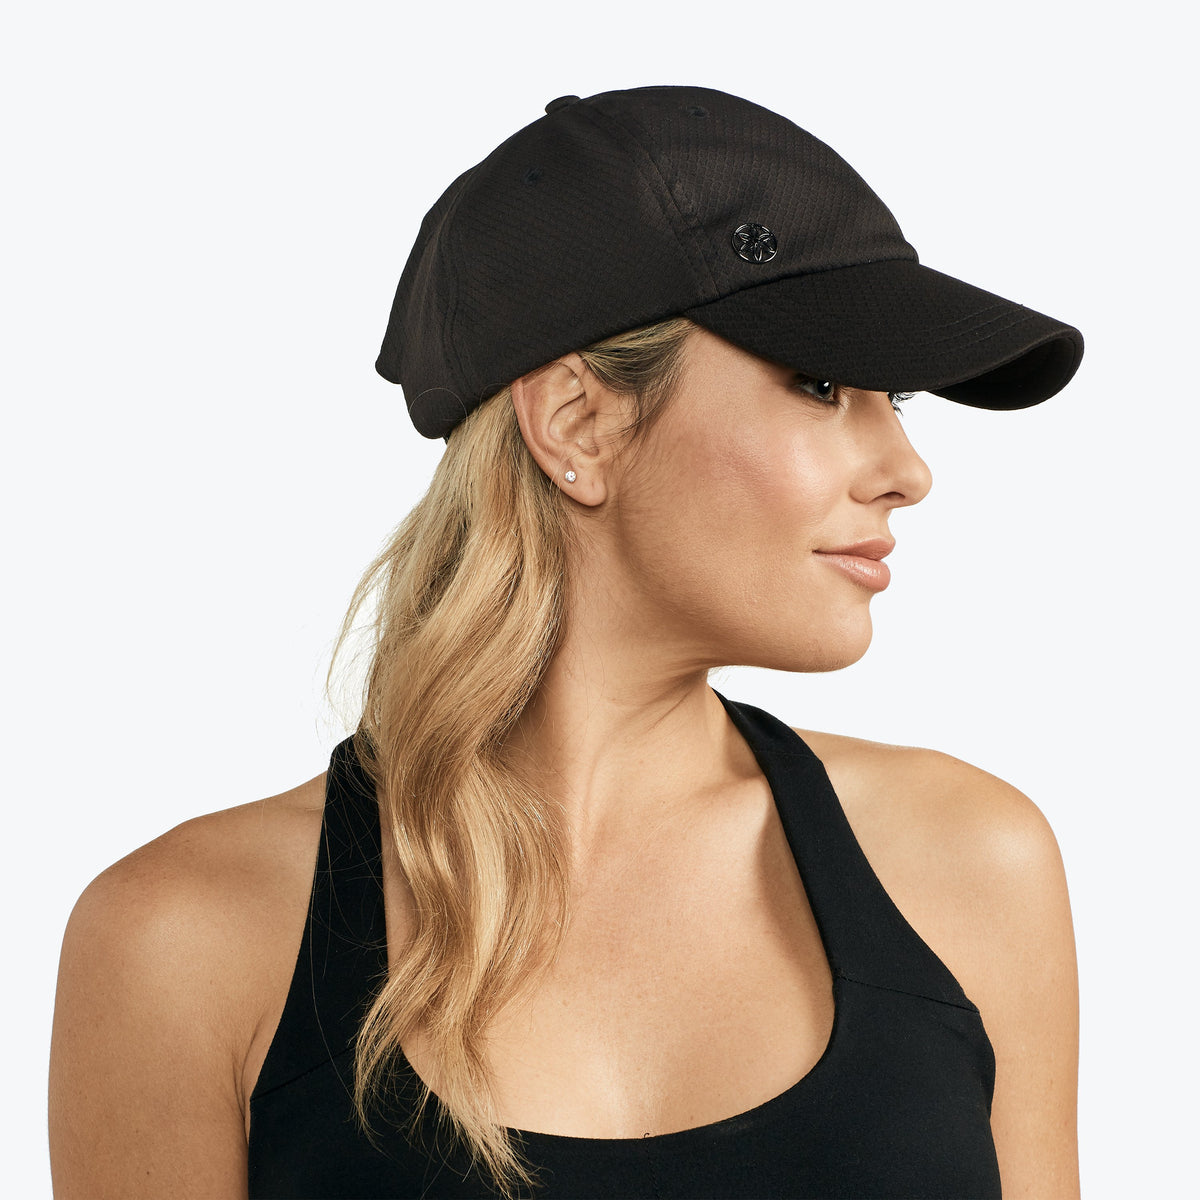 Performance Material Fitness Hat